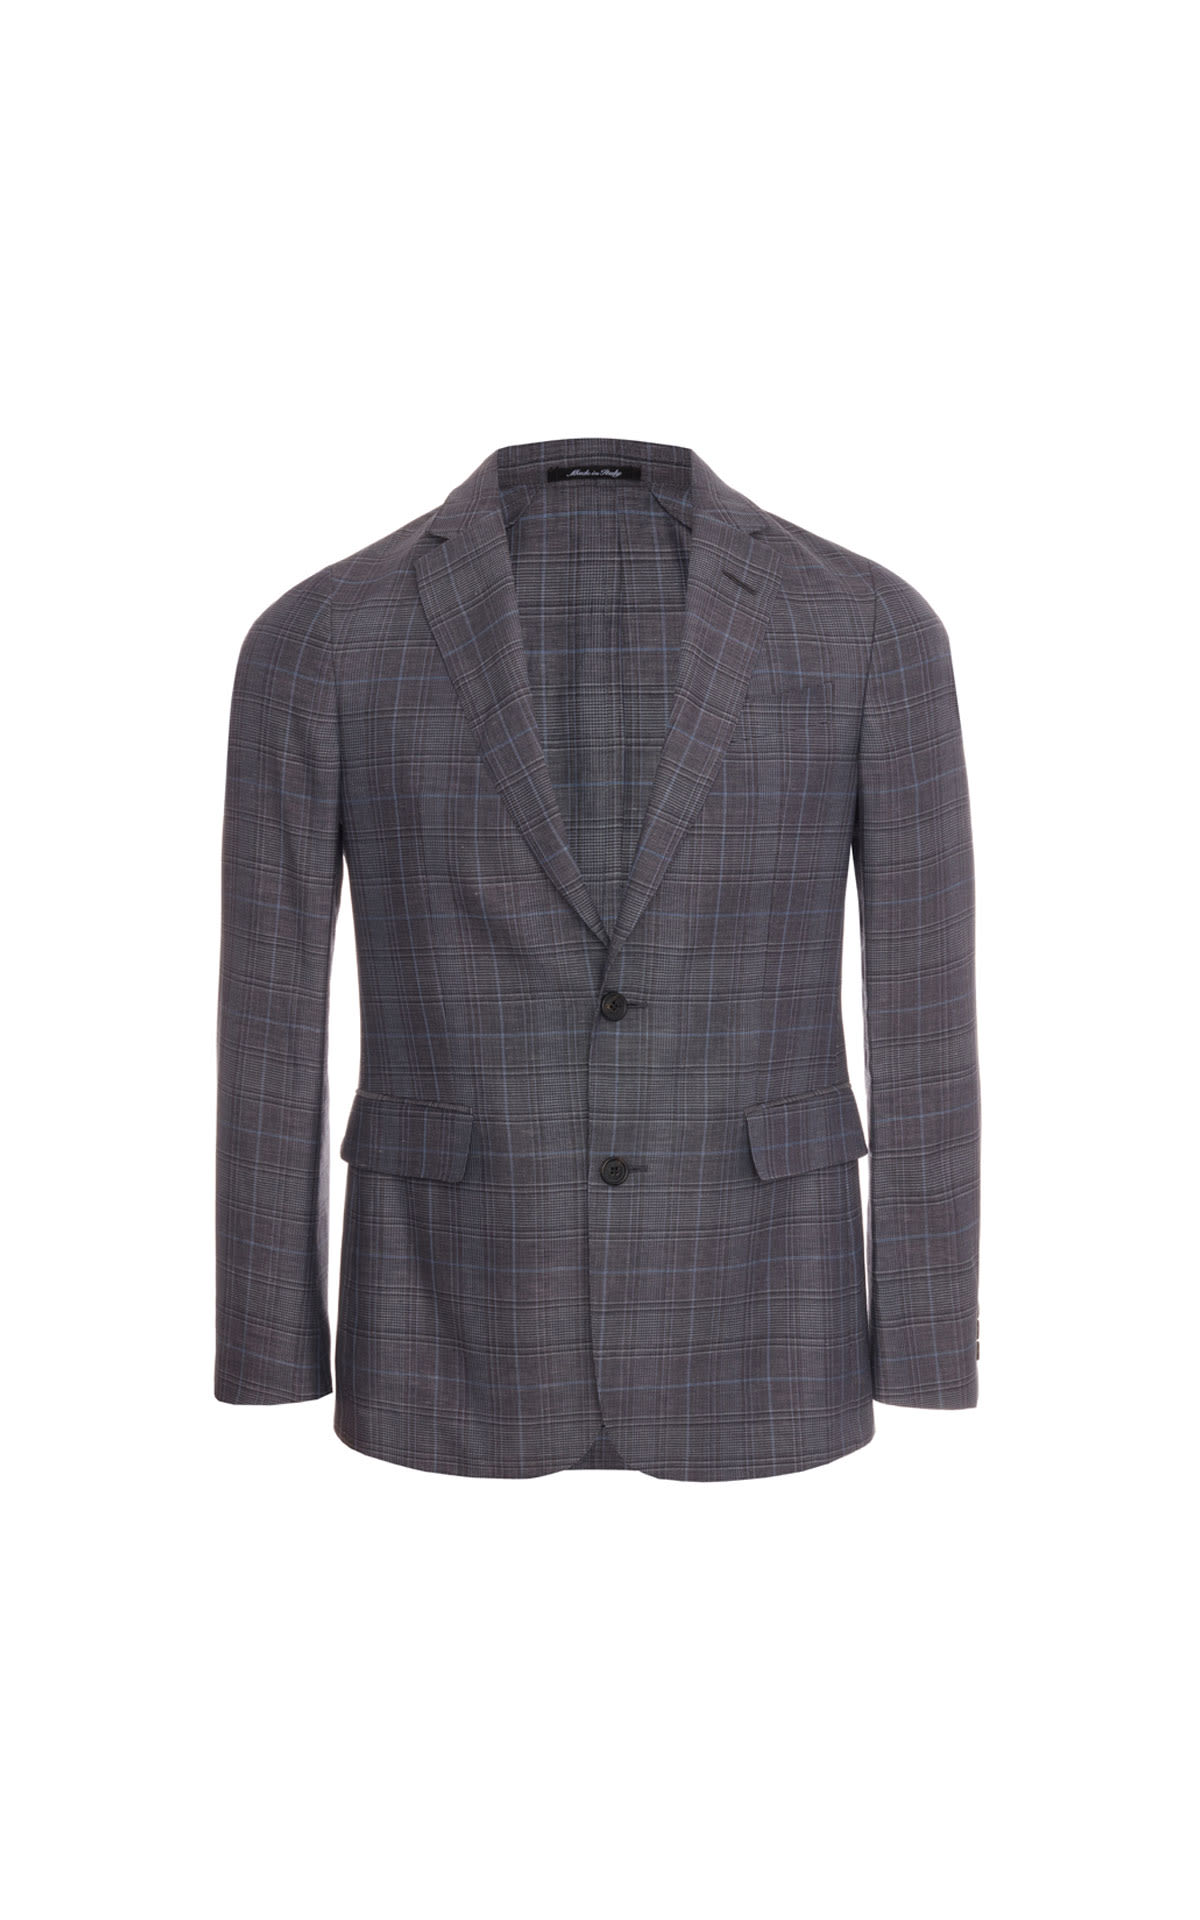 dunhill Check fine wool jacket from Bicester Village